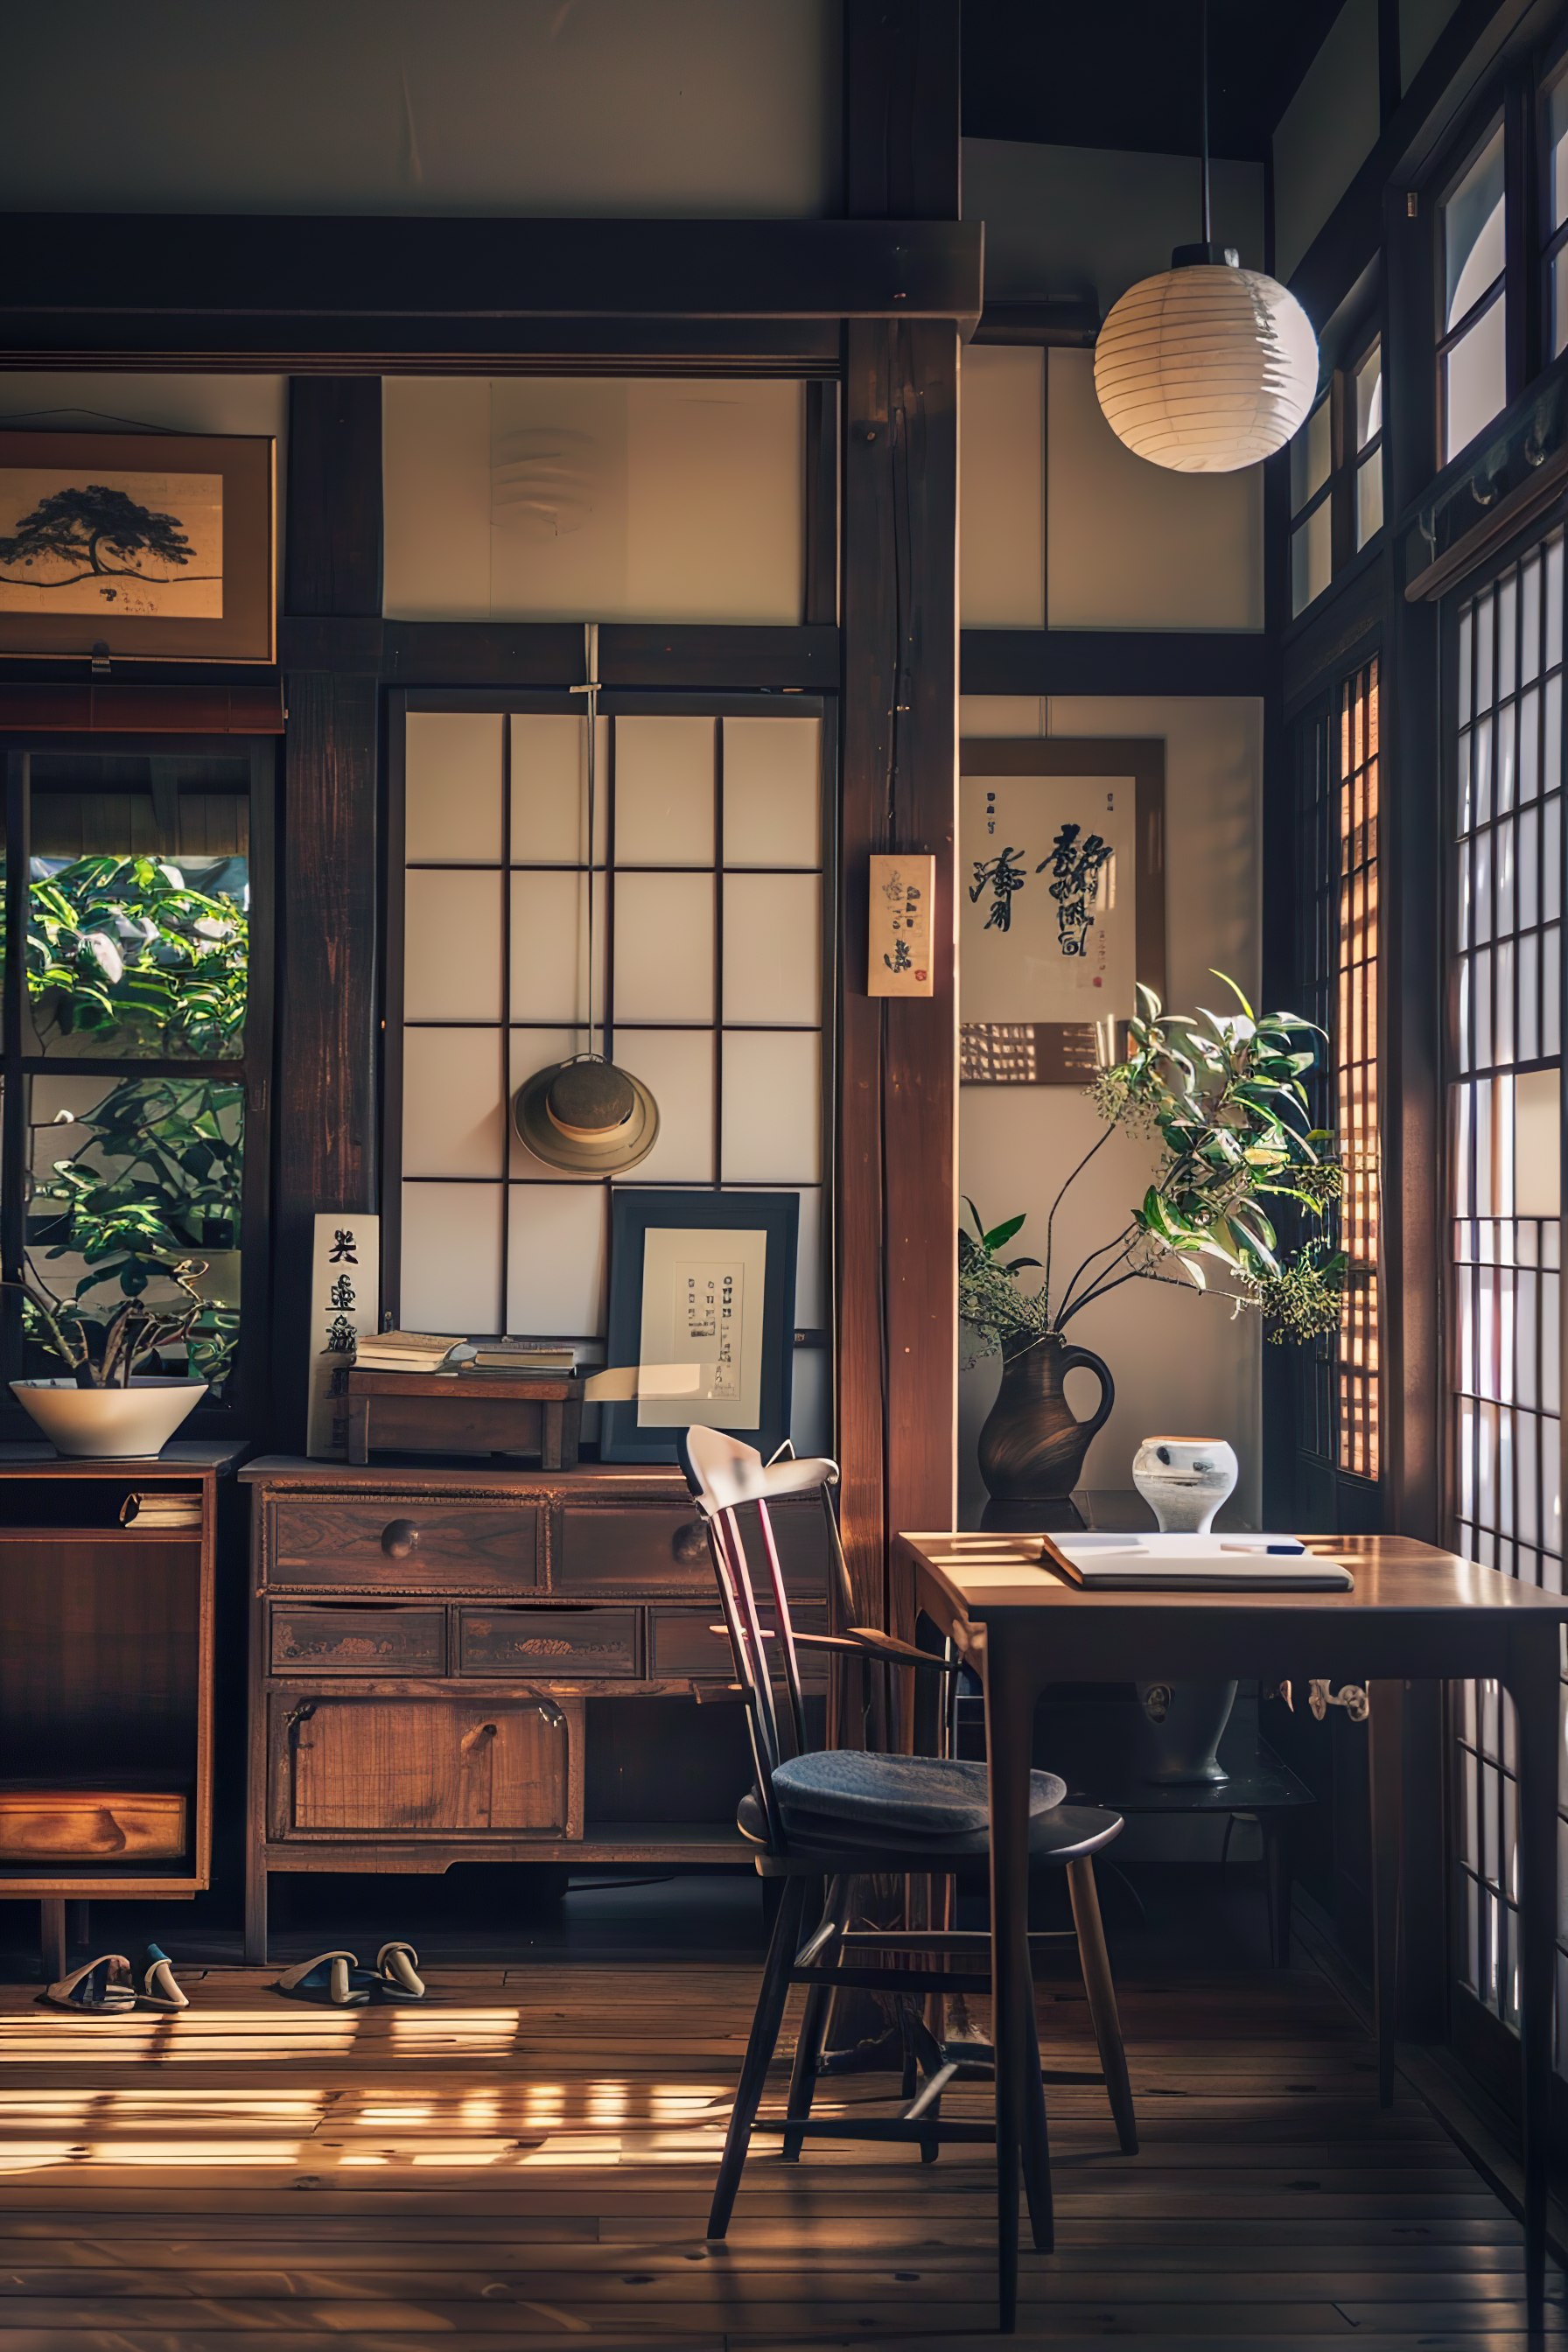 A traditional Japanese style room with wooden furniture, shoji screens, and a hanging paper lantern.